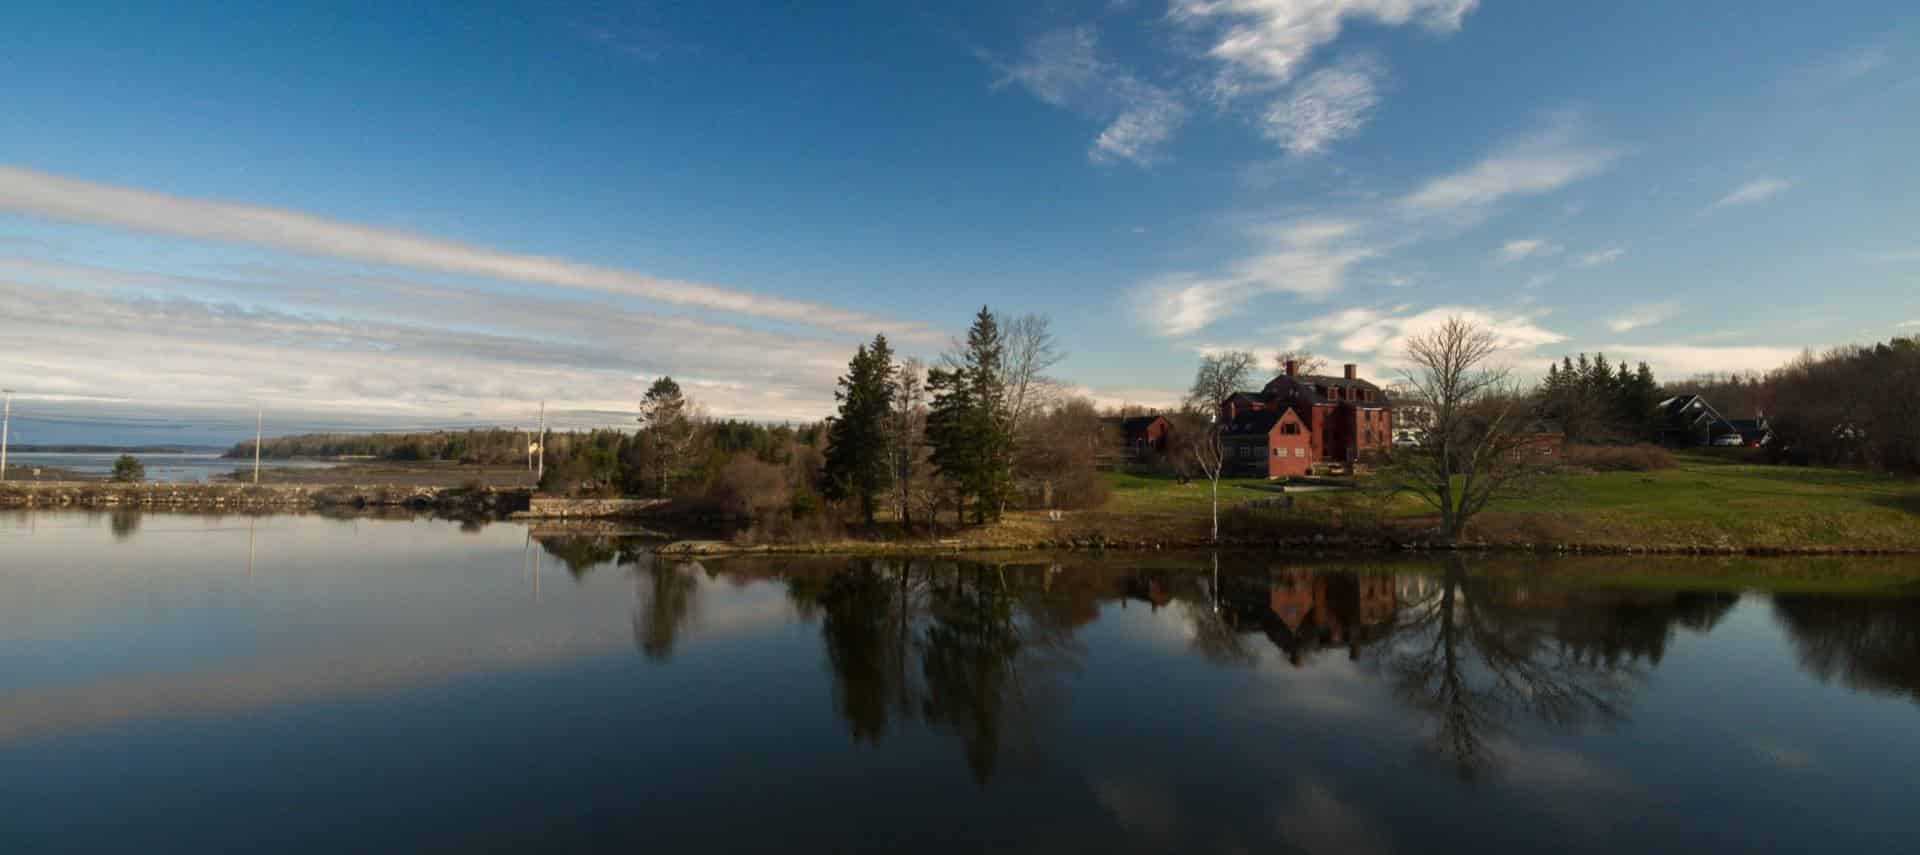 Exterior view of property surrounded by green grass and trees next to a large body of water with white clouds in the sky